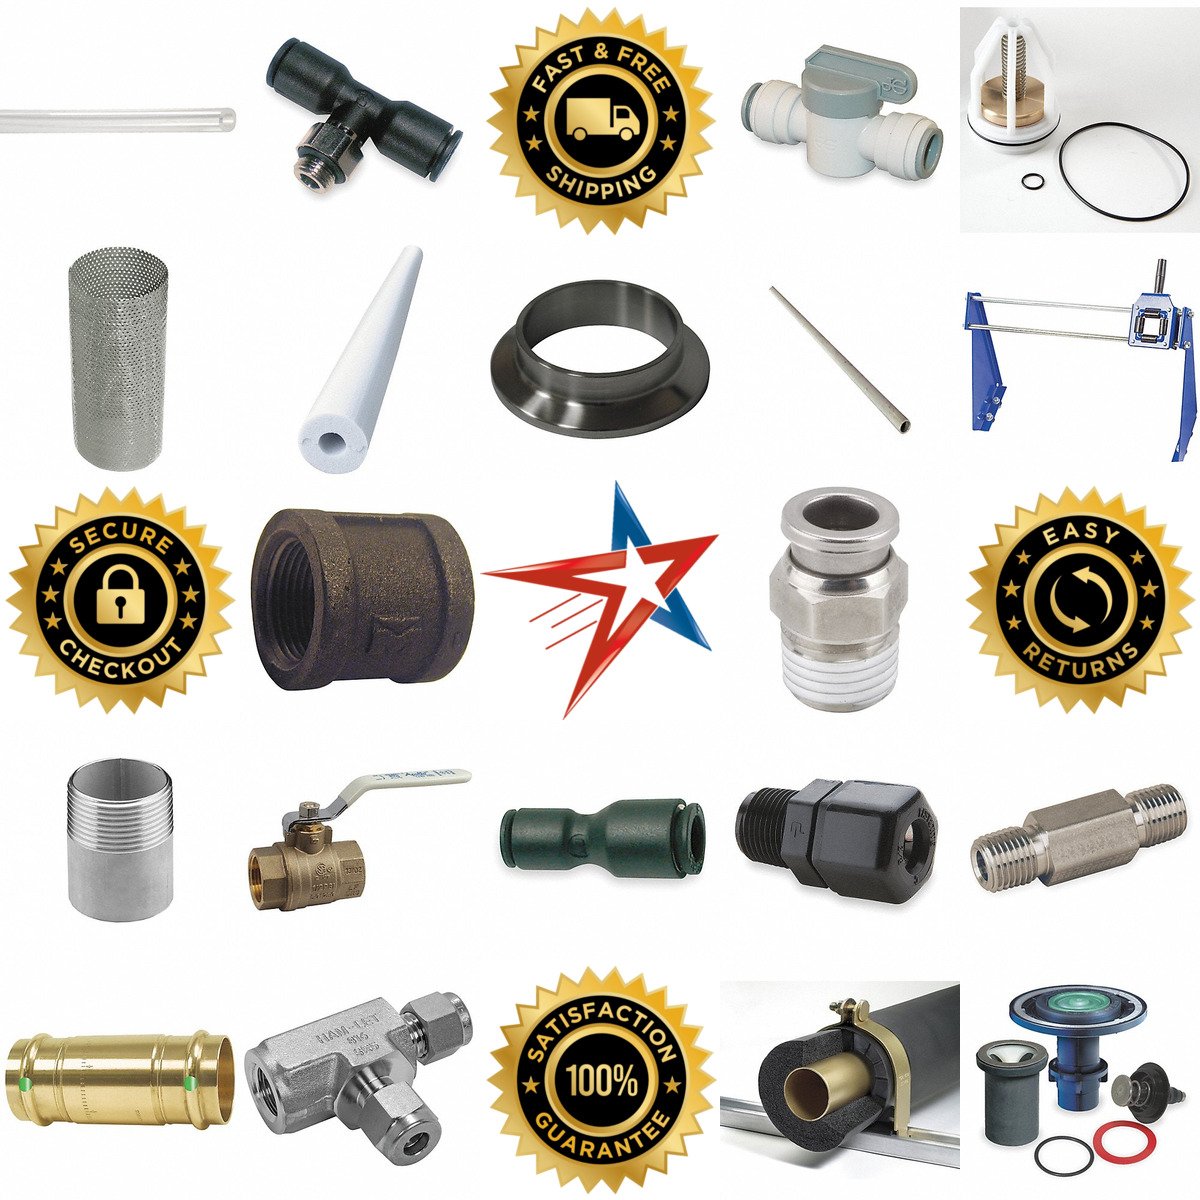 A selection of Plumbing products on GoVets